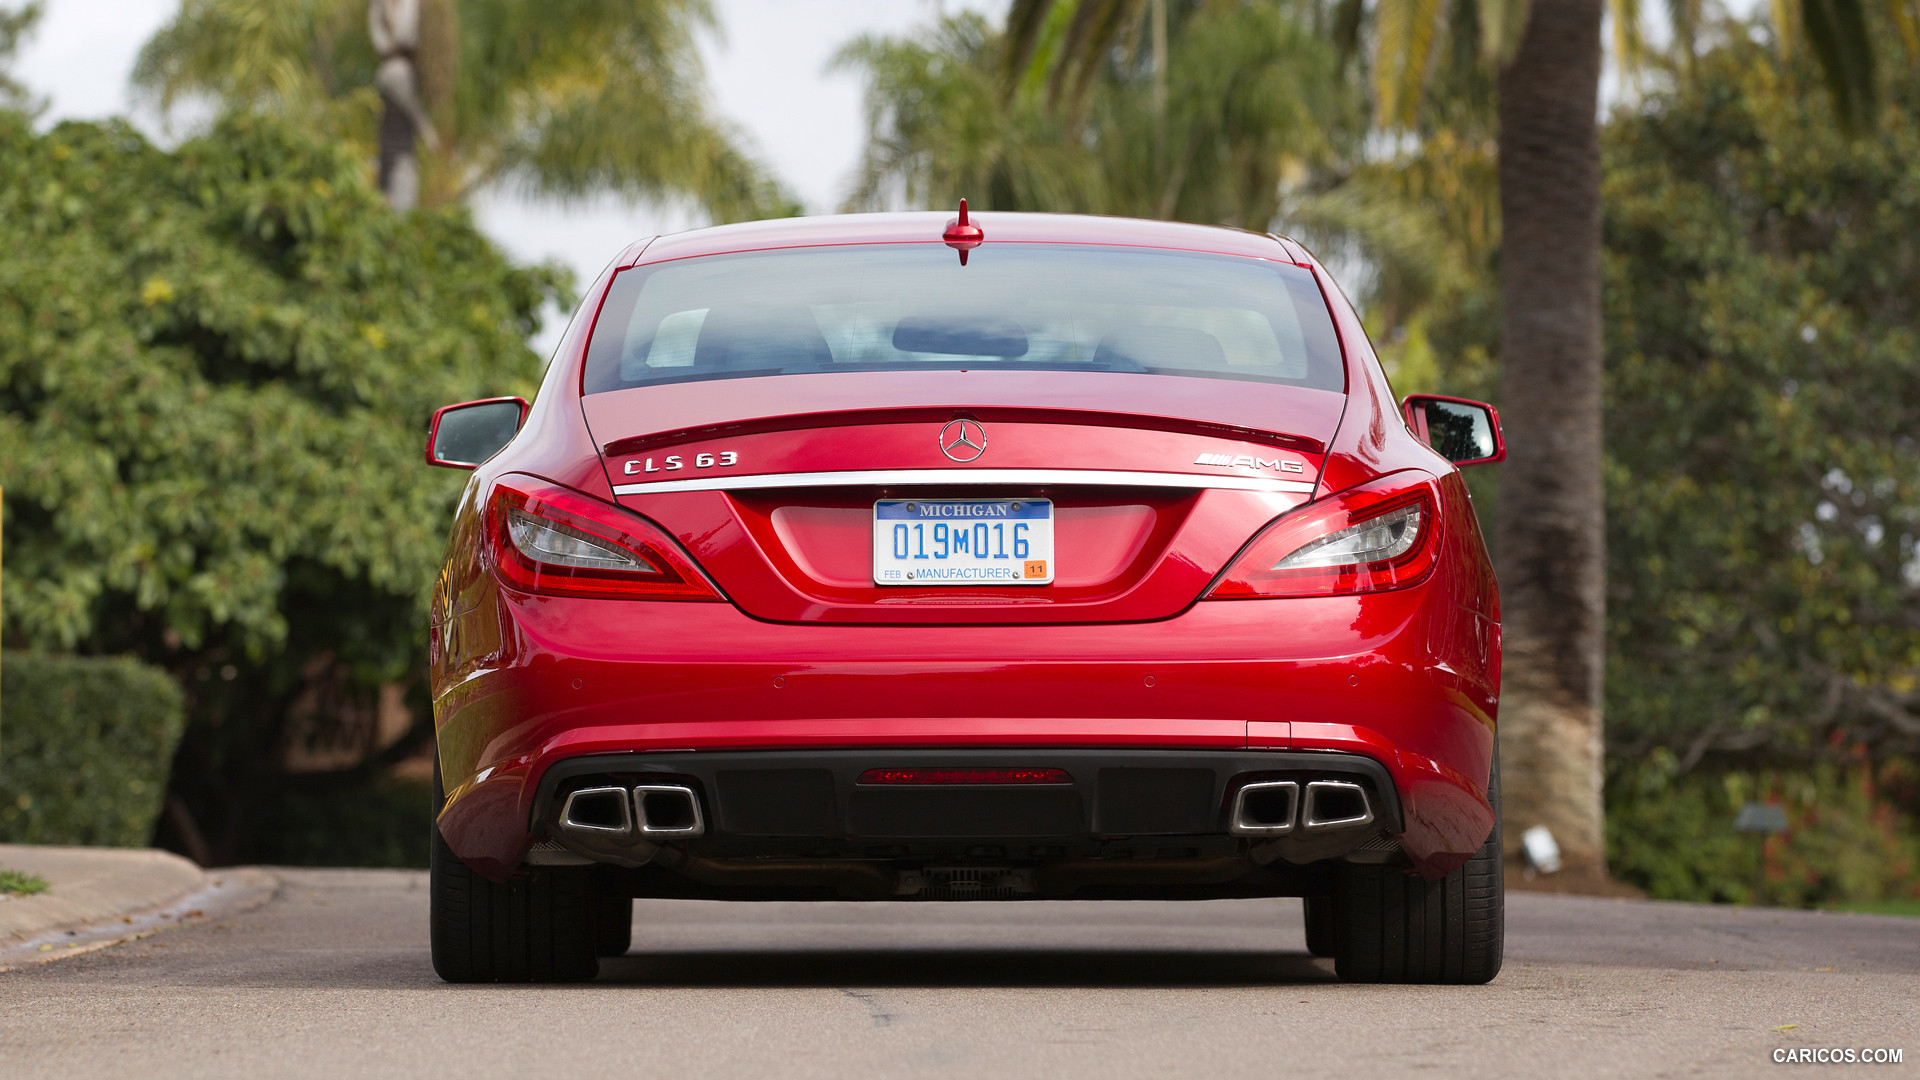 Mercedes-Benz CLS 63 AMG (2012)  - Rear Angle , #12 of 85